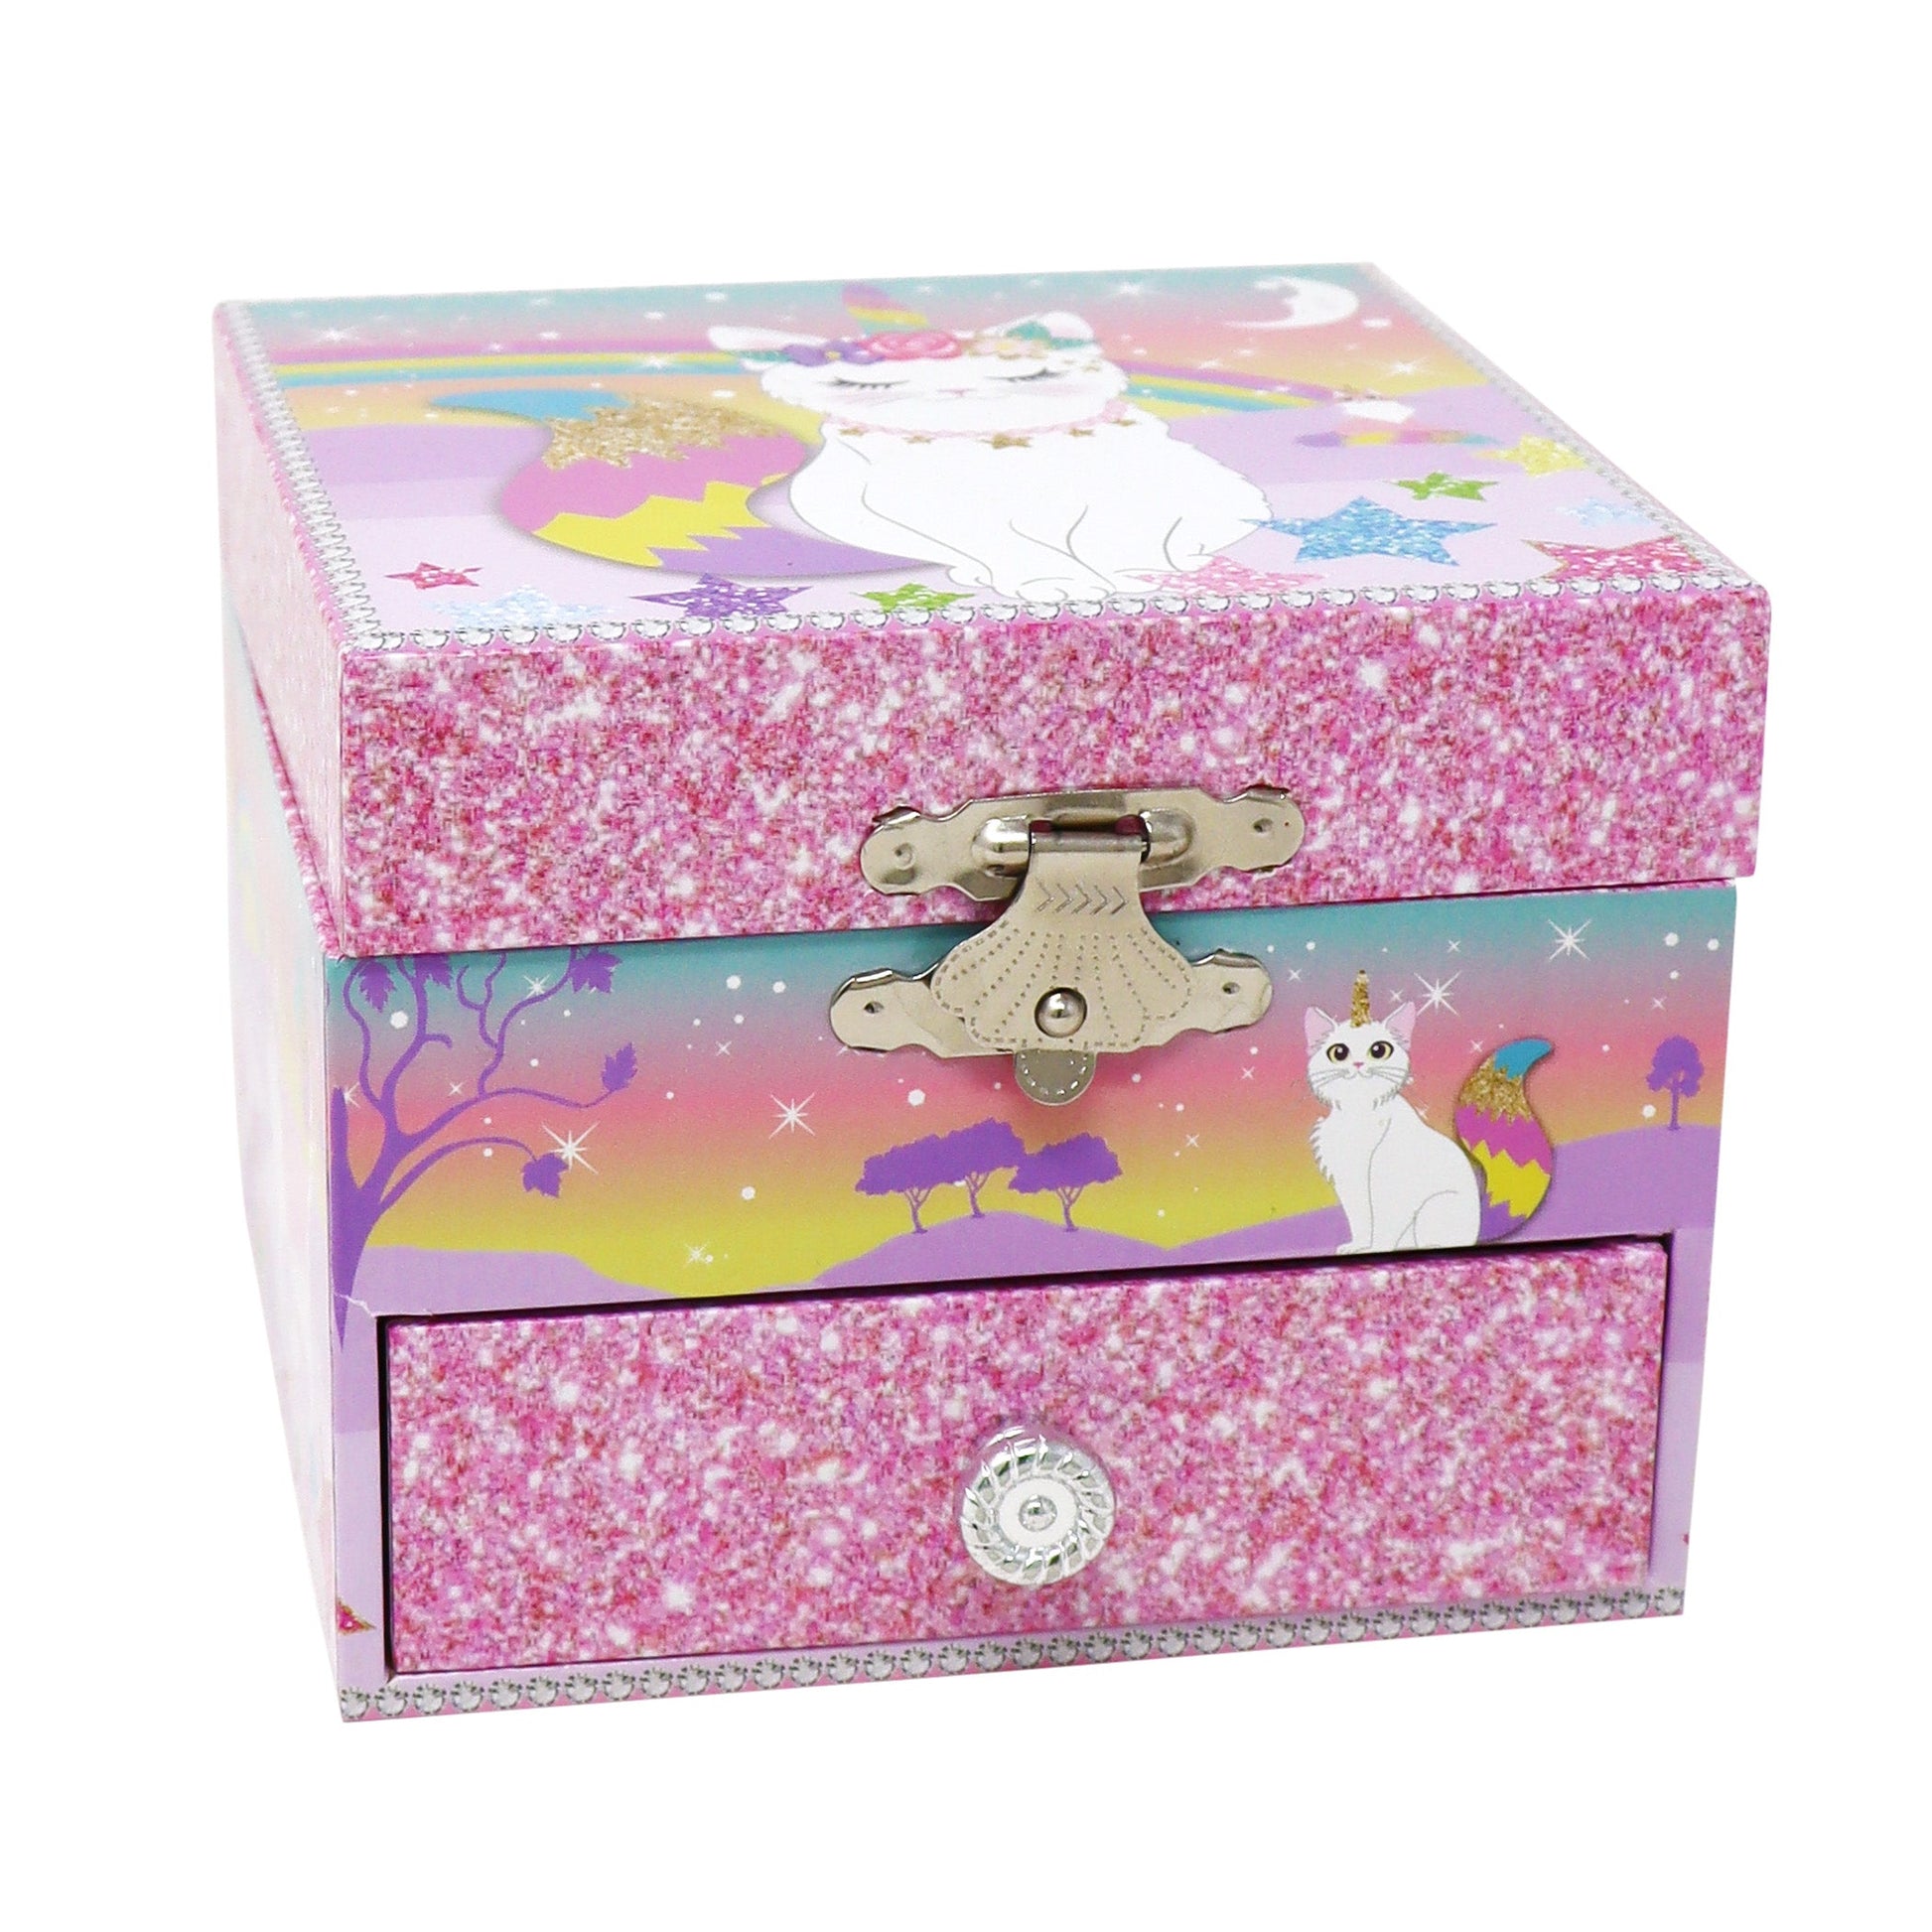 Pink Poppy Caticorn Dreams Small Musical Jewellery Box The Toy Wagon